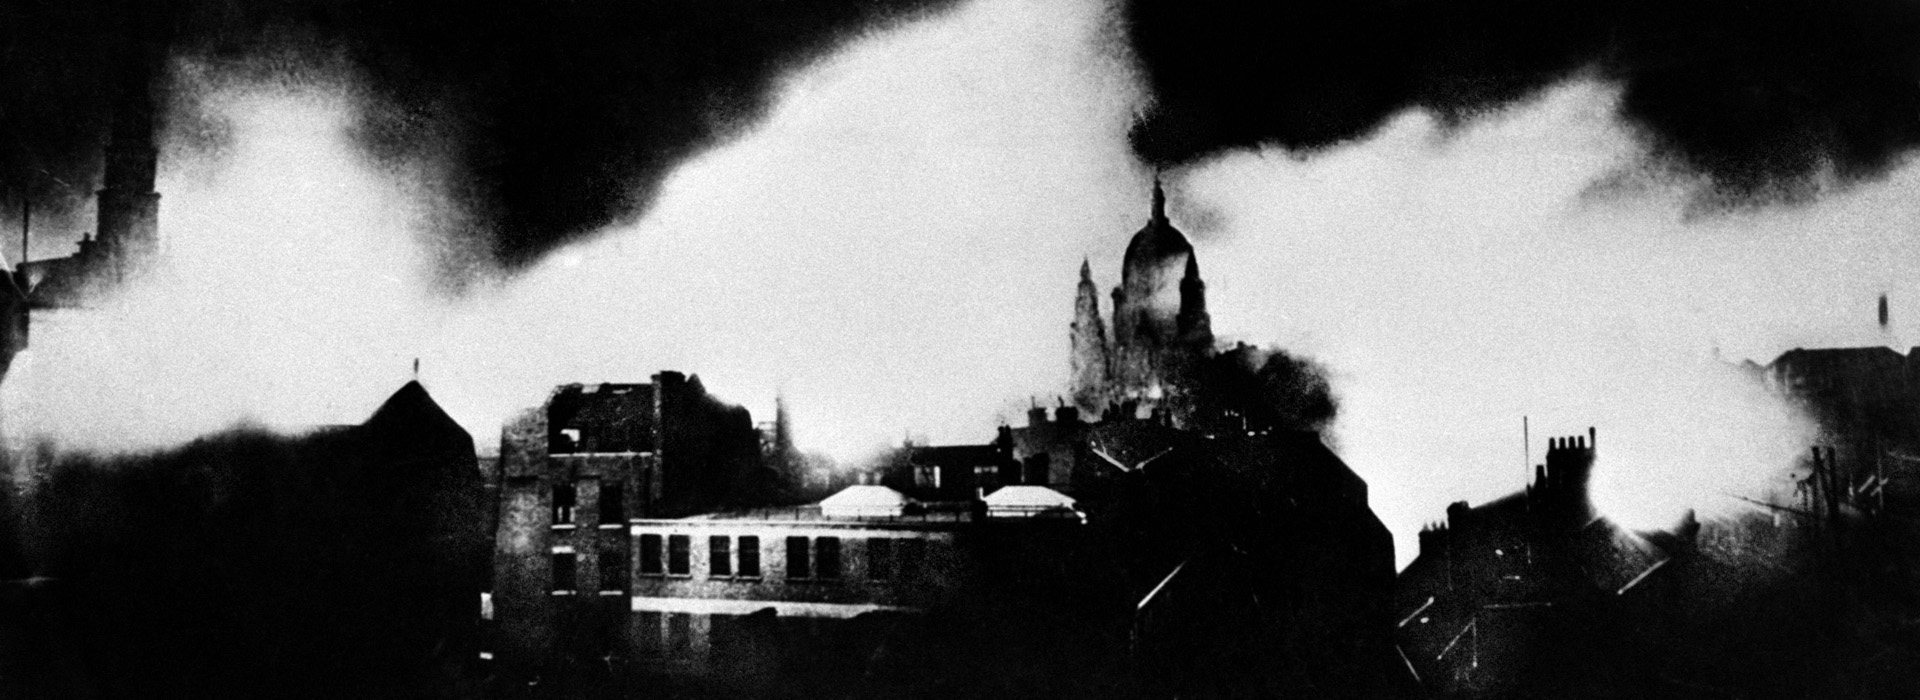 This photo was taken from the Press Association building in London on the night of May 10, 1941. It captures the British capital city in flames at the height of the heavy German bombing raid. 